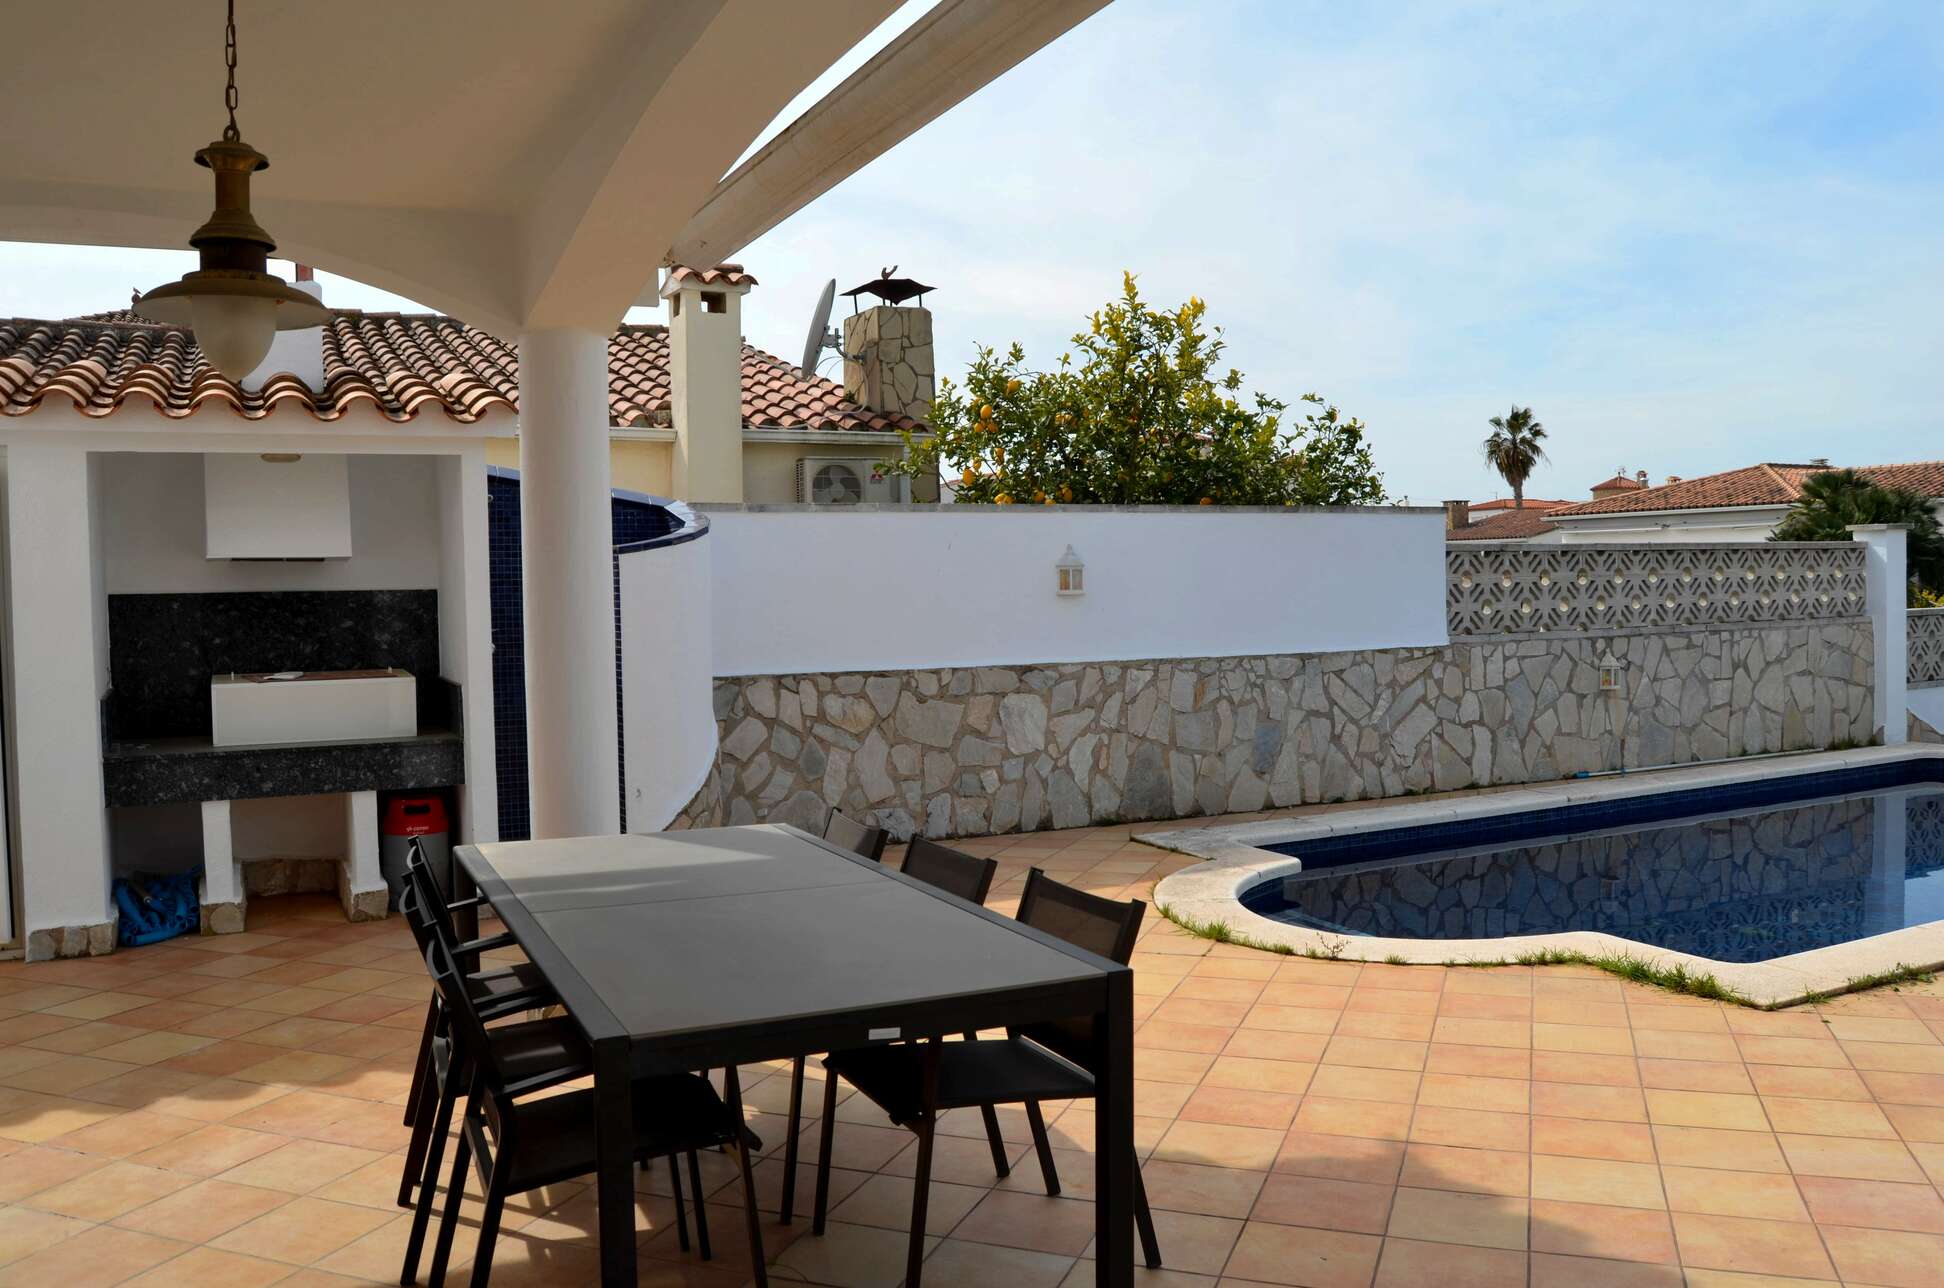 Superb villa on the Norfeu canal 4 bedrooms, 12.5m mooring, swimming pool